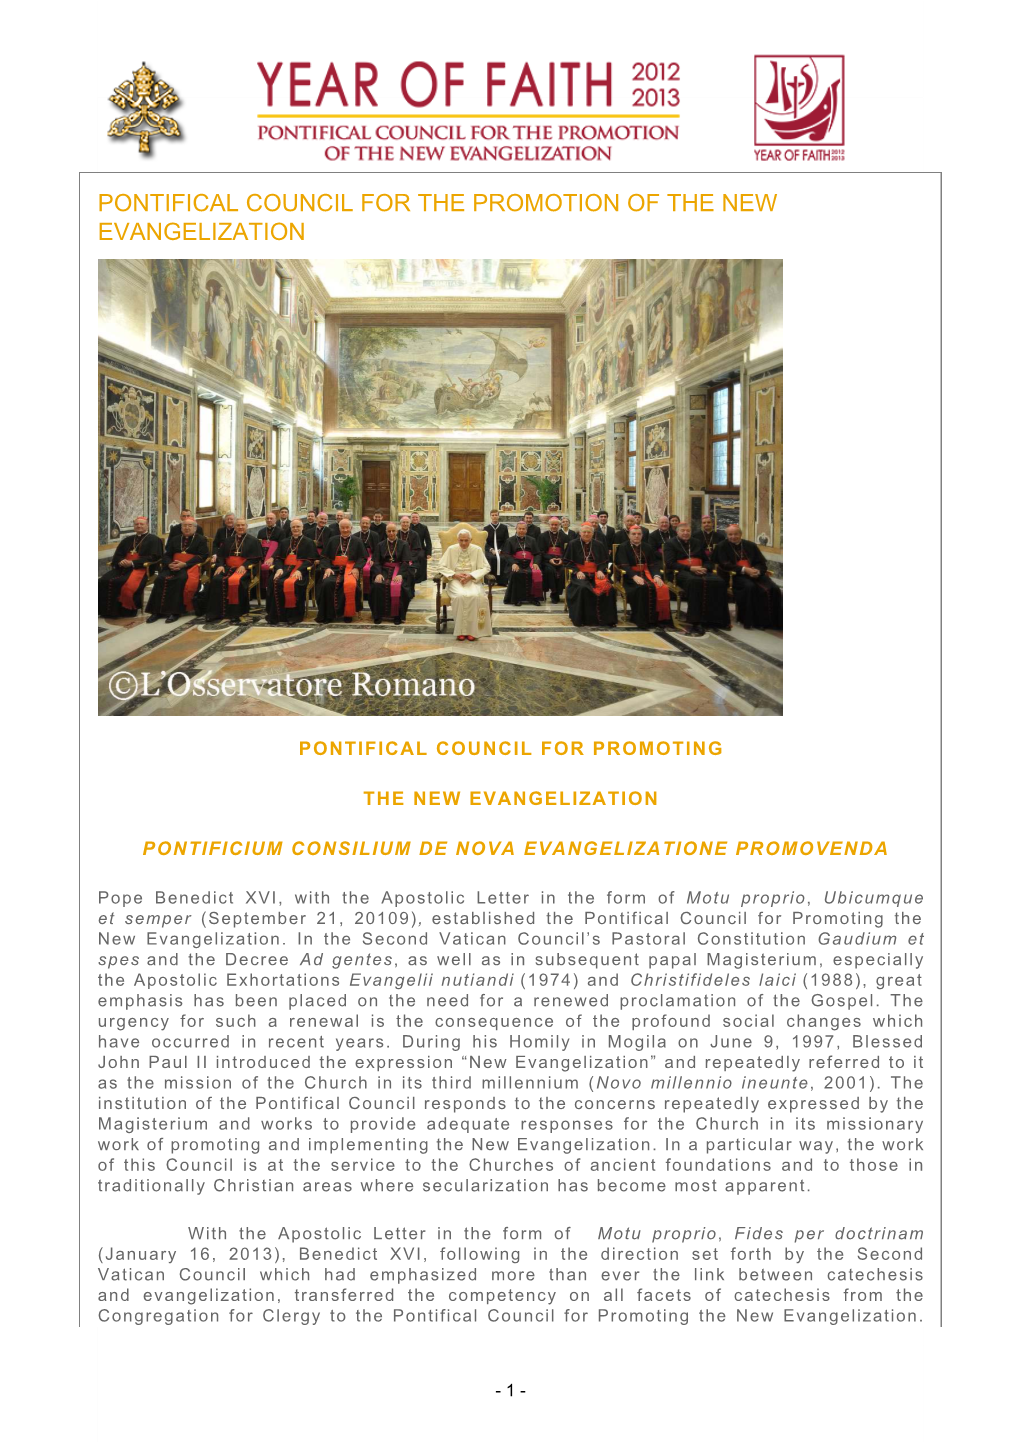 Pontifical Council for the Promotion of the New Evangelization